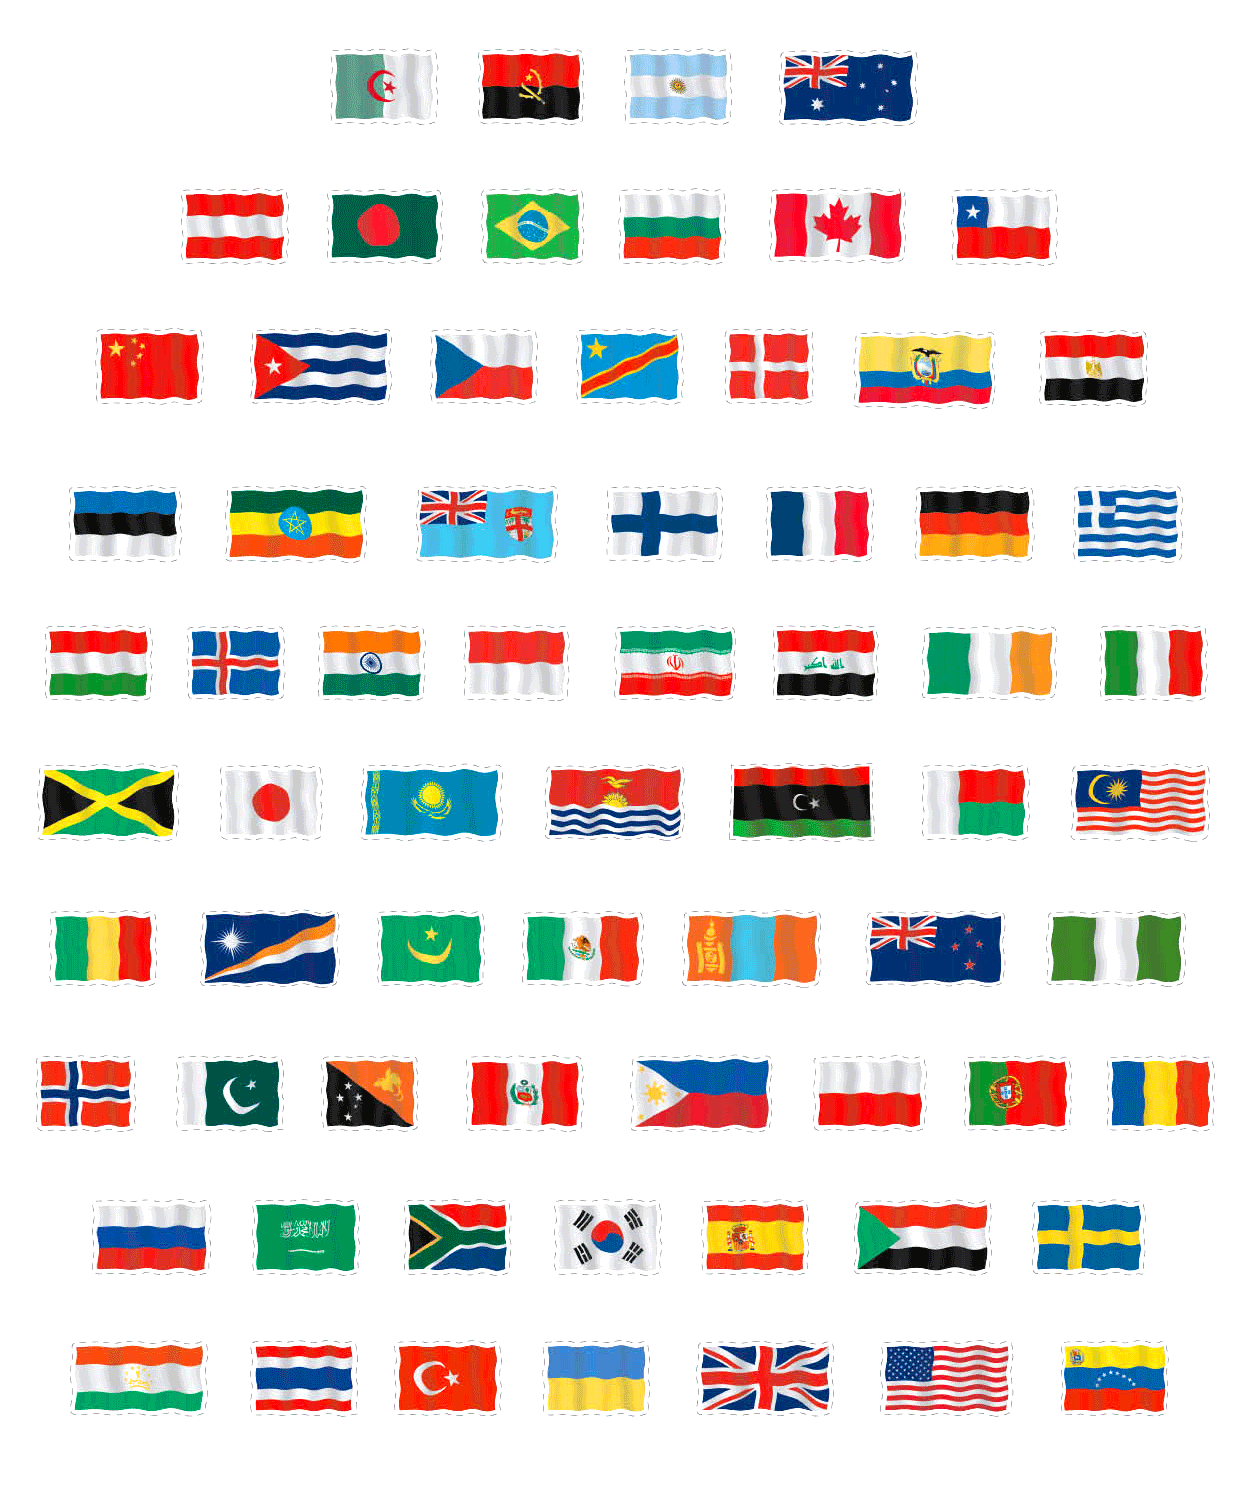 Can You Identify These Flags Of The World?